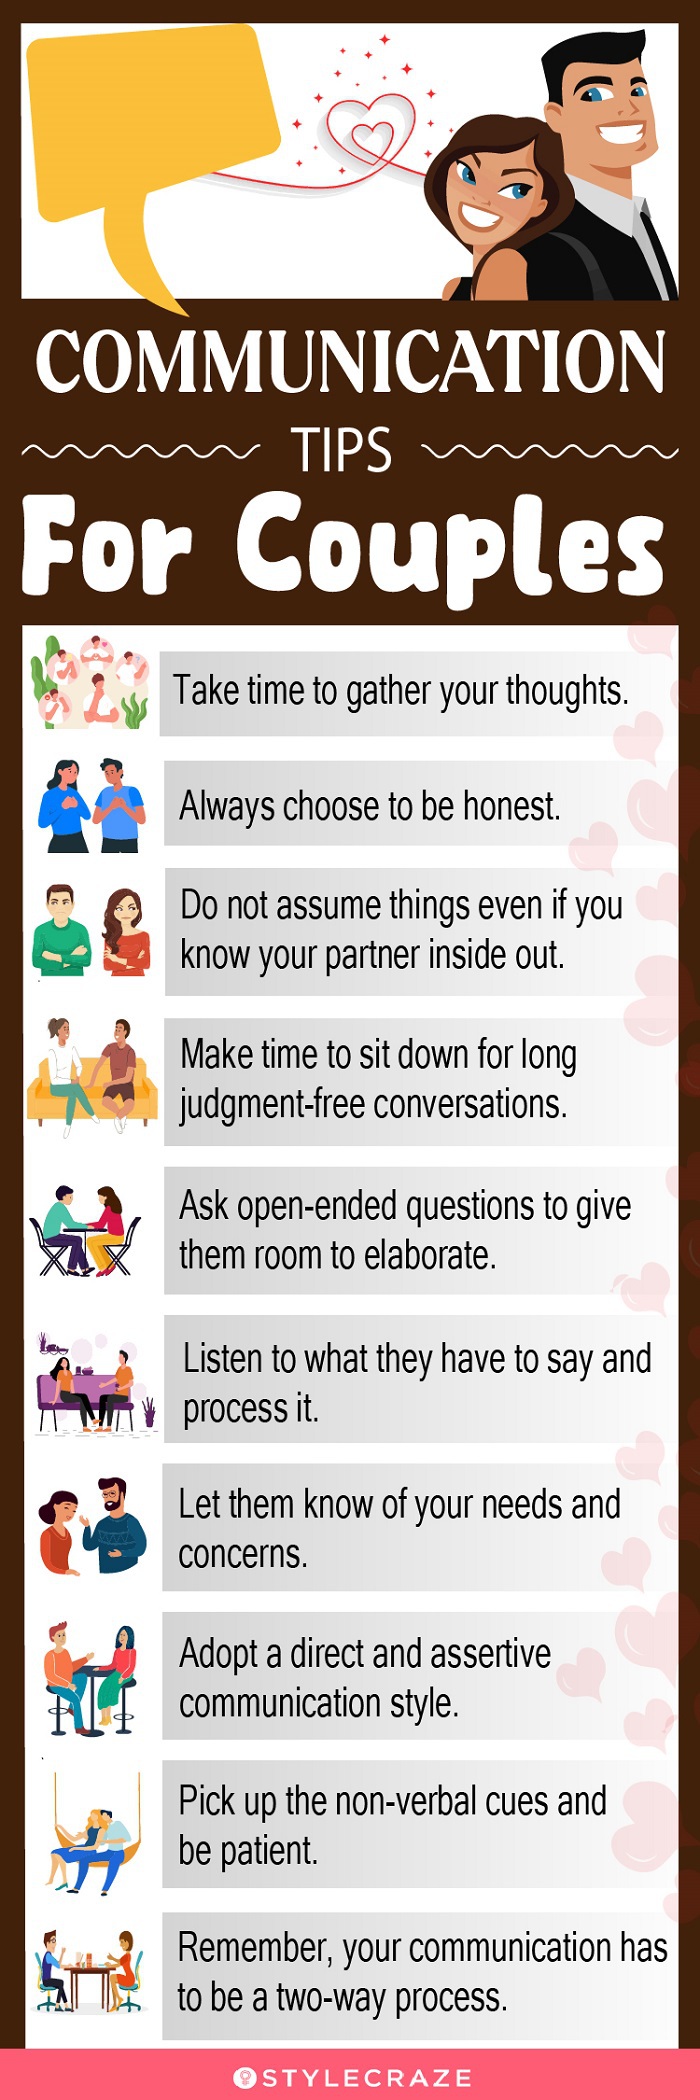 communication tips for couples [infographic]